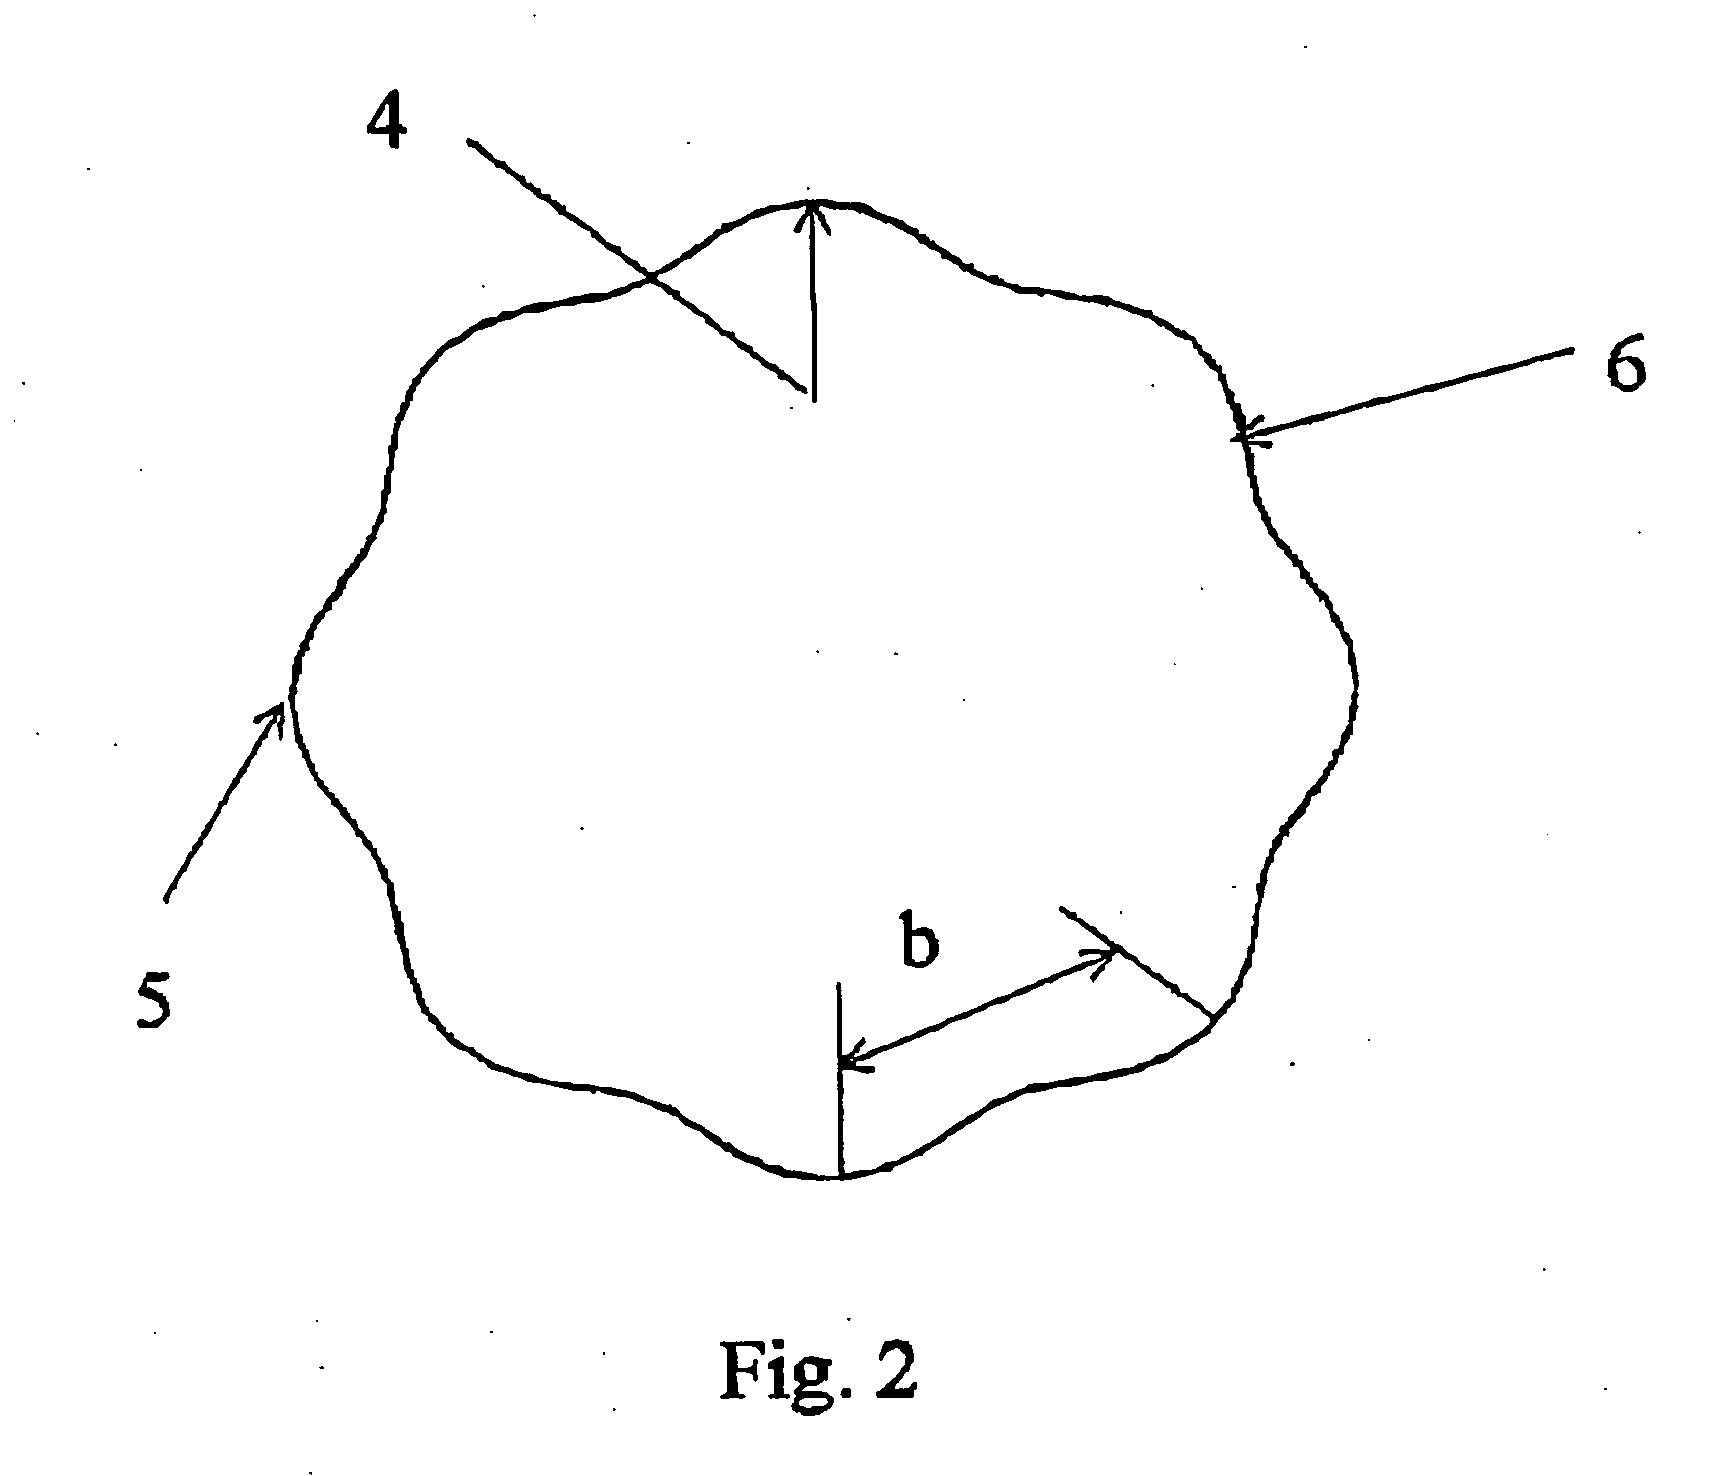 Fluid flow guide element and fluid flow apparatus equipped therewith